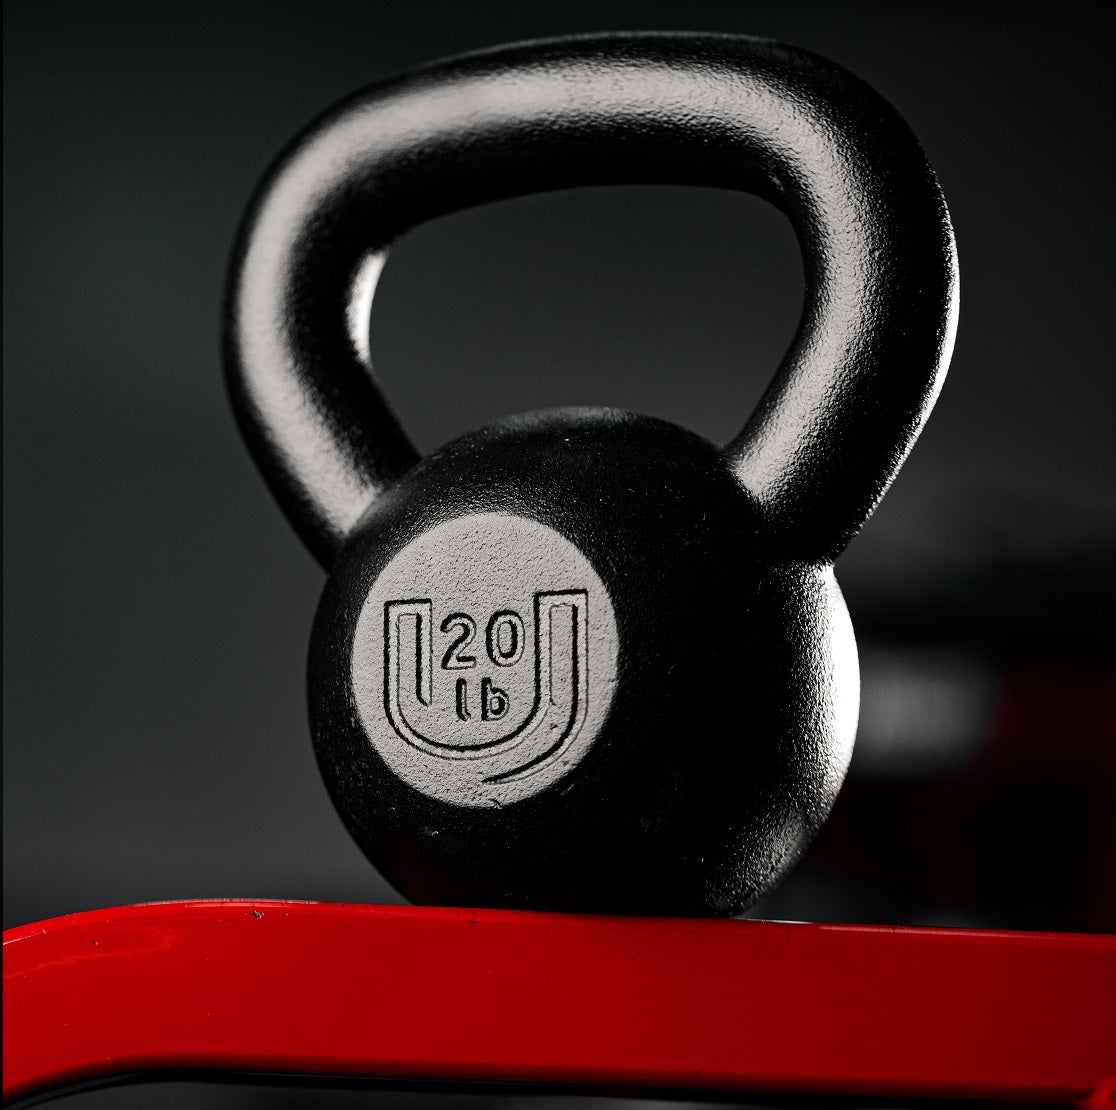 Cast Iron Kettlebell, 5 lb to 50 Pounds for Weight Lifting Workout